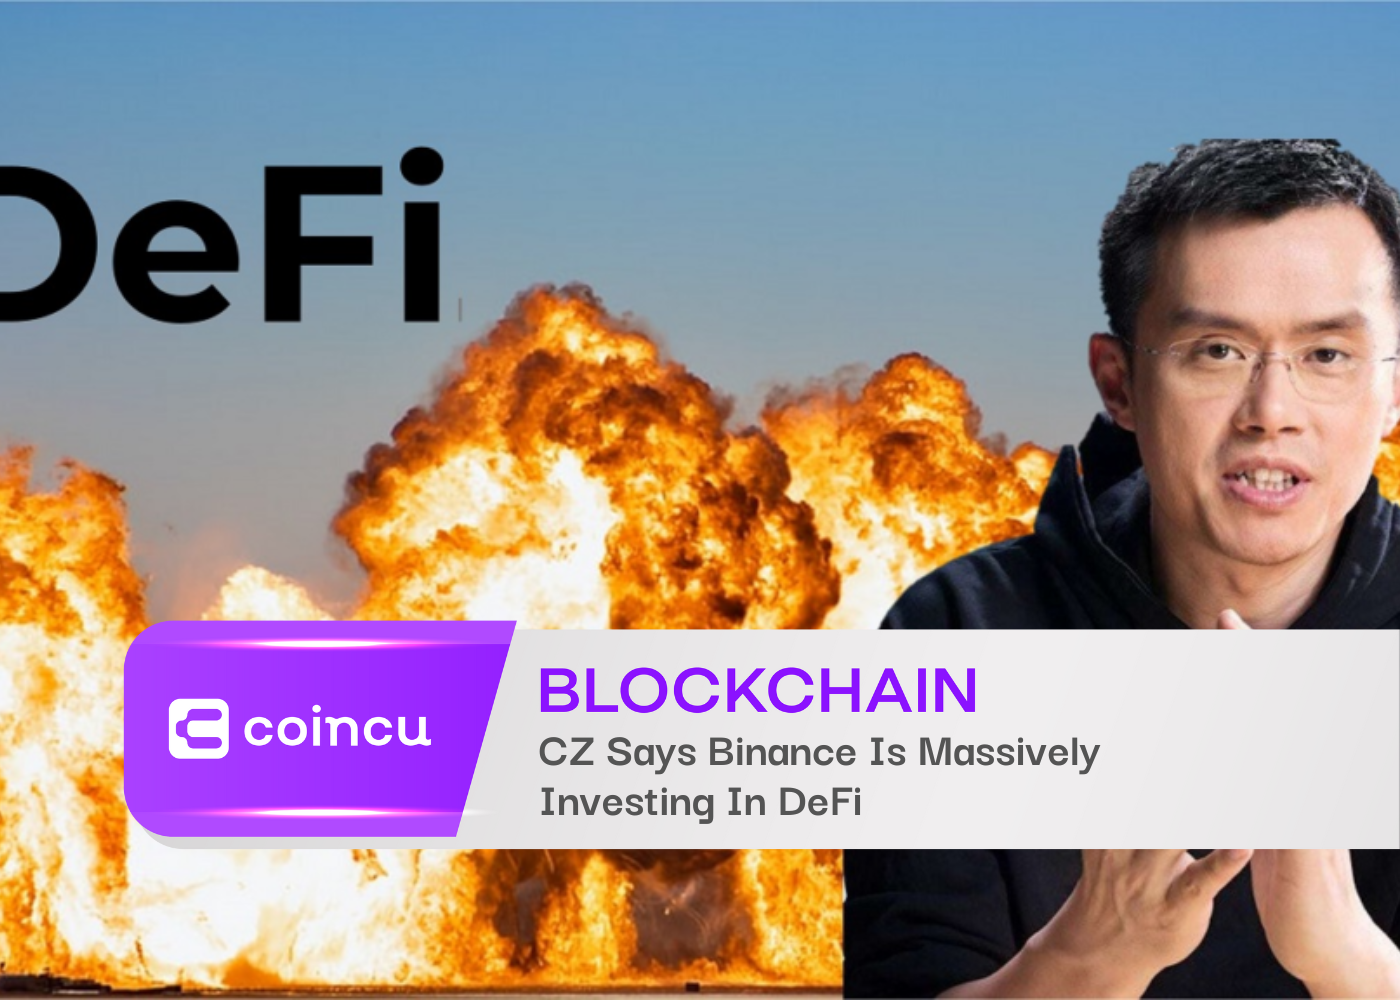 CZ Says Binance Is Massively Investing In DeFi